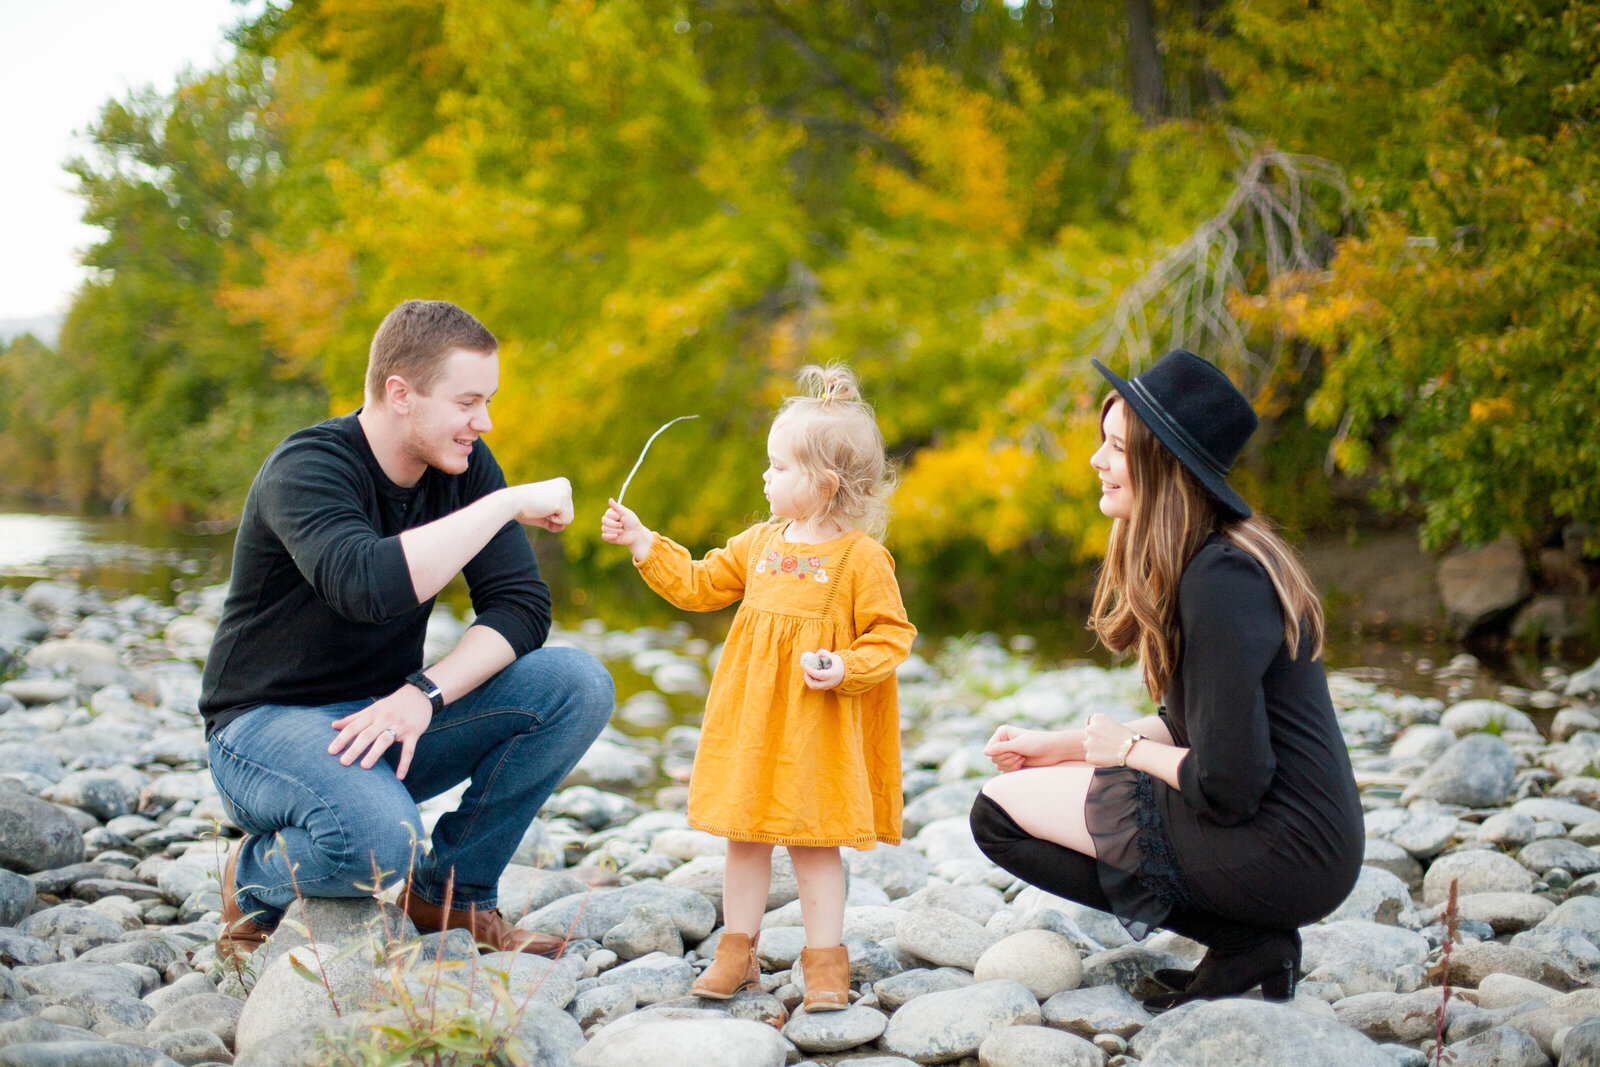 An child wearing a yellow dress playing with her parents.